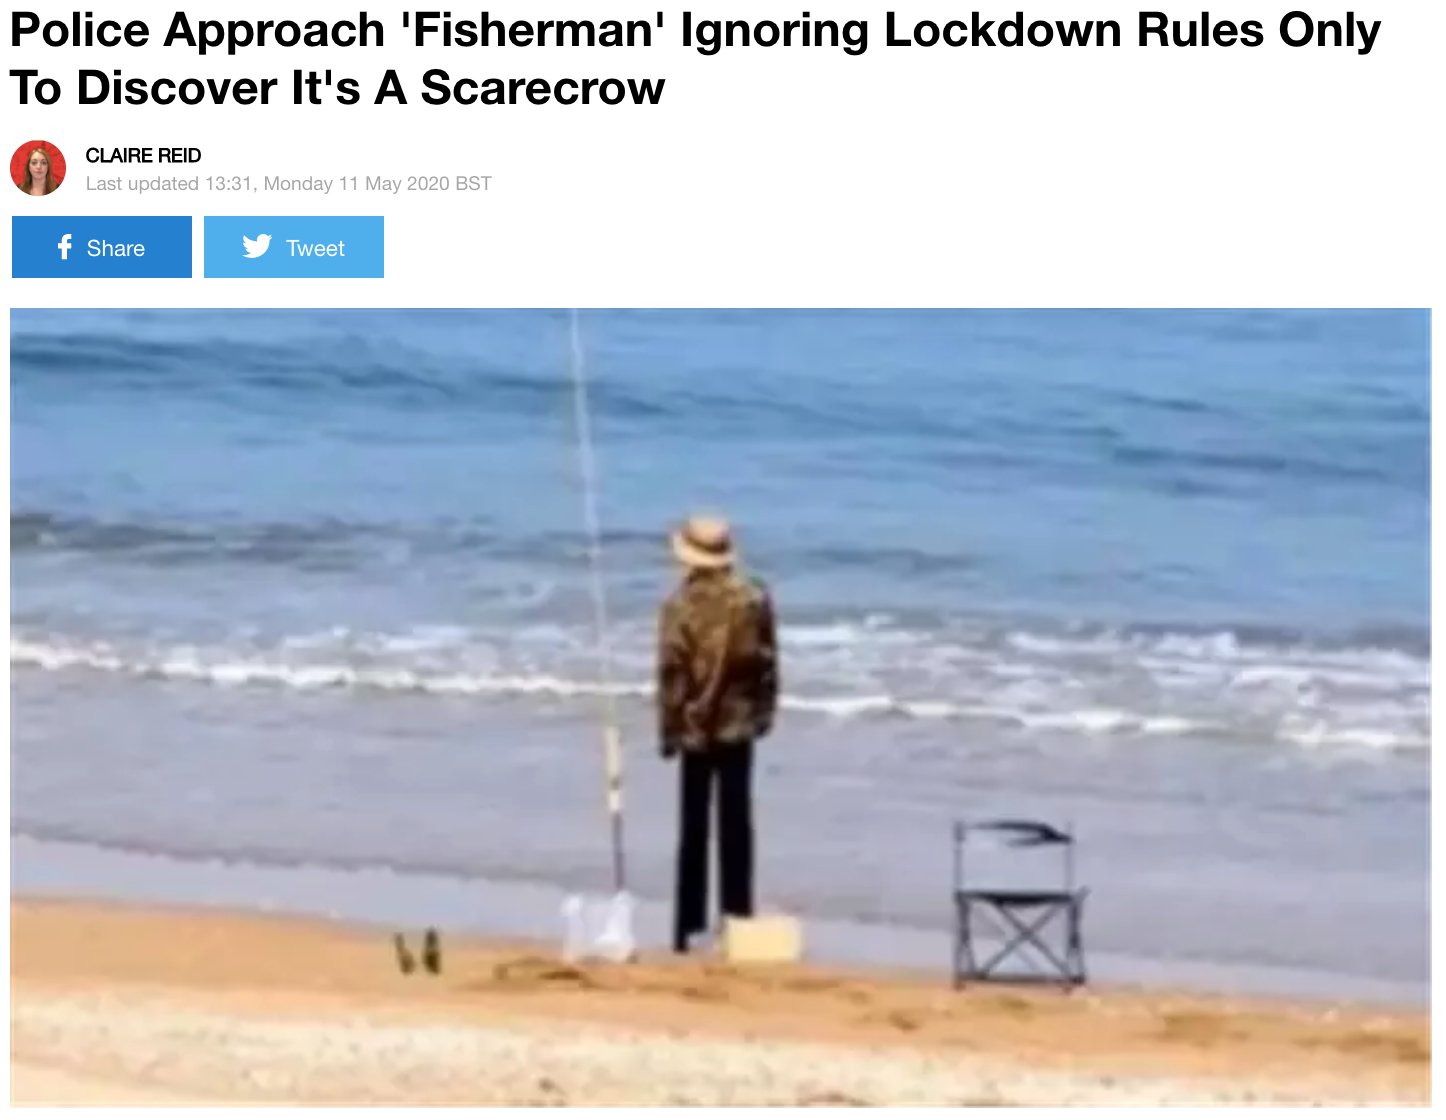 Police Approach 'Fisherman' Ignoring Lockdown Rules Only To Discover It's A Scarecrow